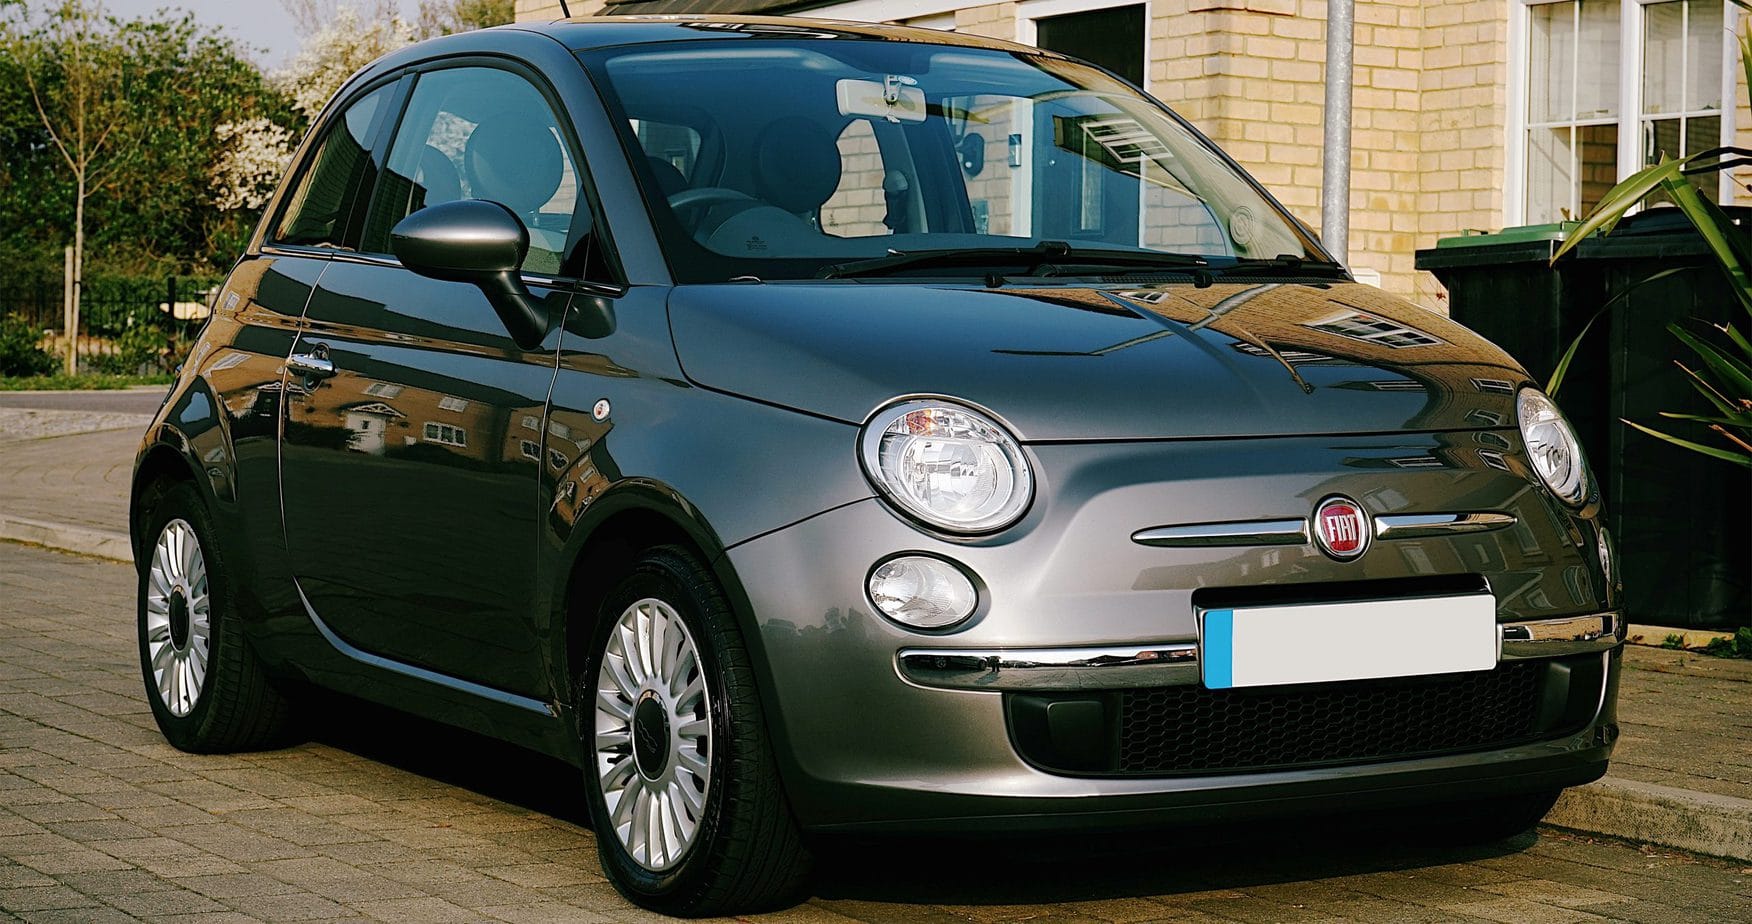 FIAT 500 – is it a car for a pensioner?